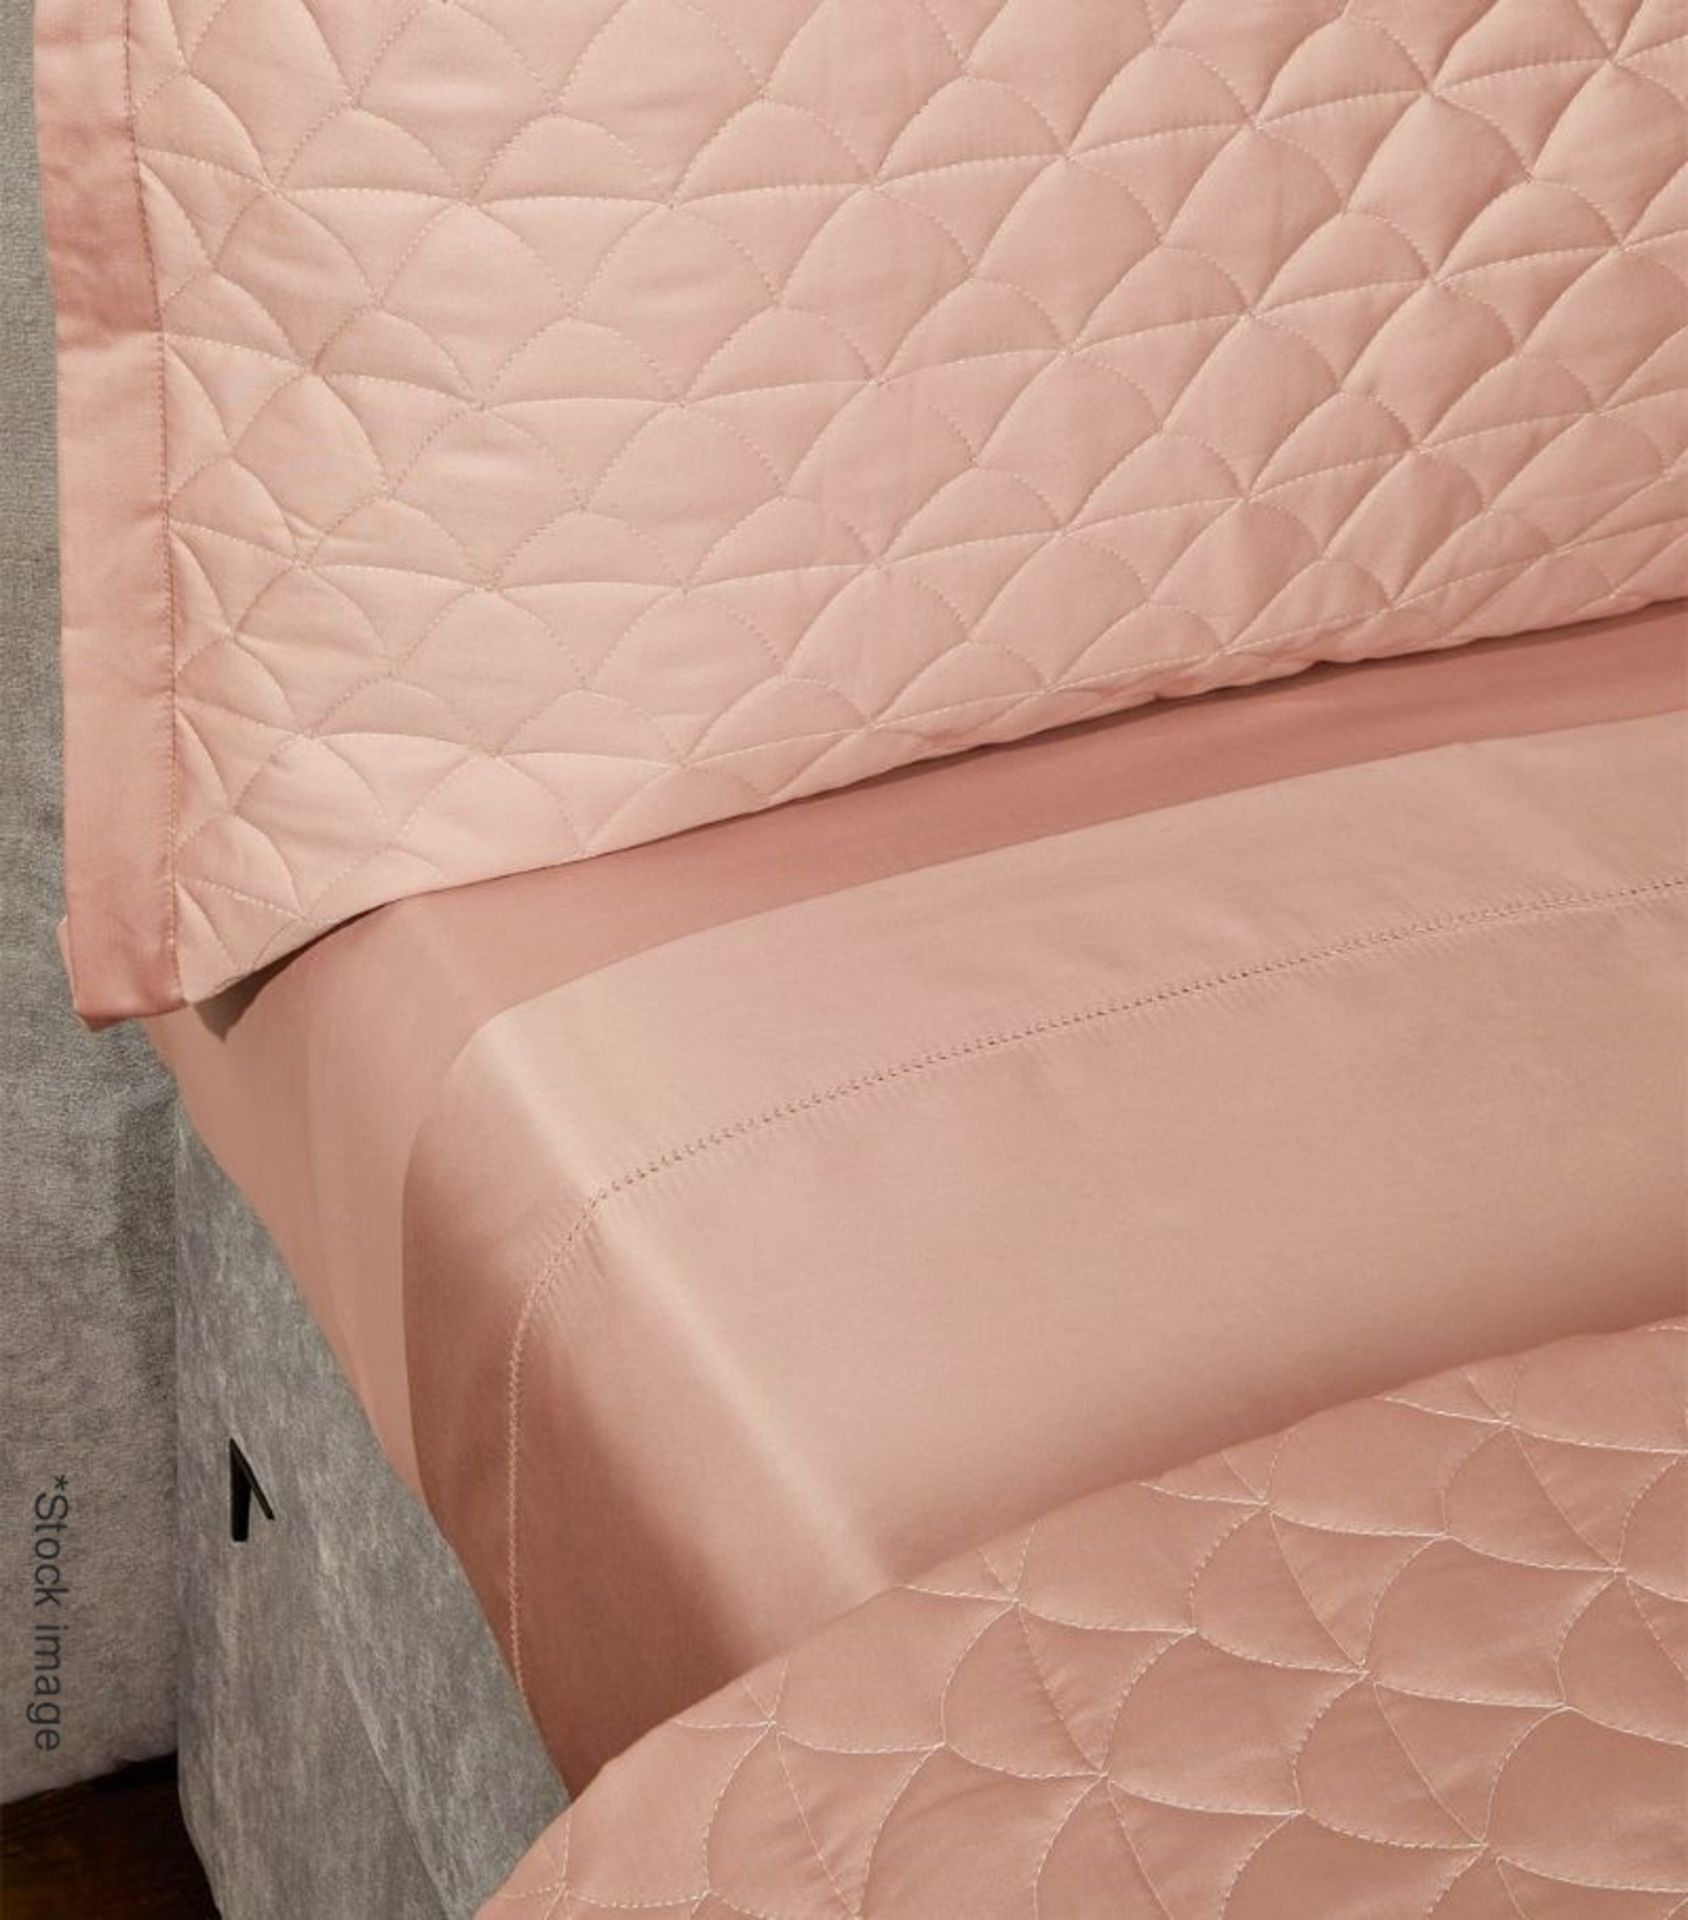 1 x AMALIA 'Suave' Luxury King Fitted Sheet In Charm Pink (150cm x 200cm) - Original Price £99.00 - Image 7 of 7